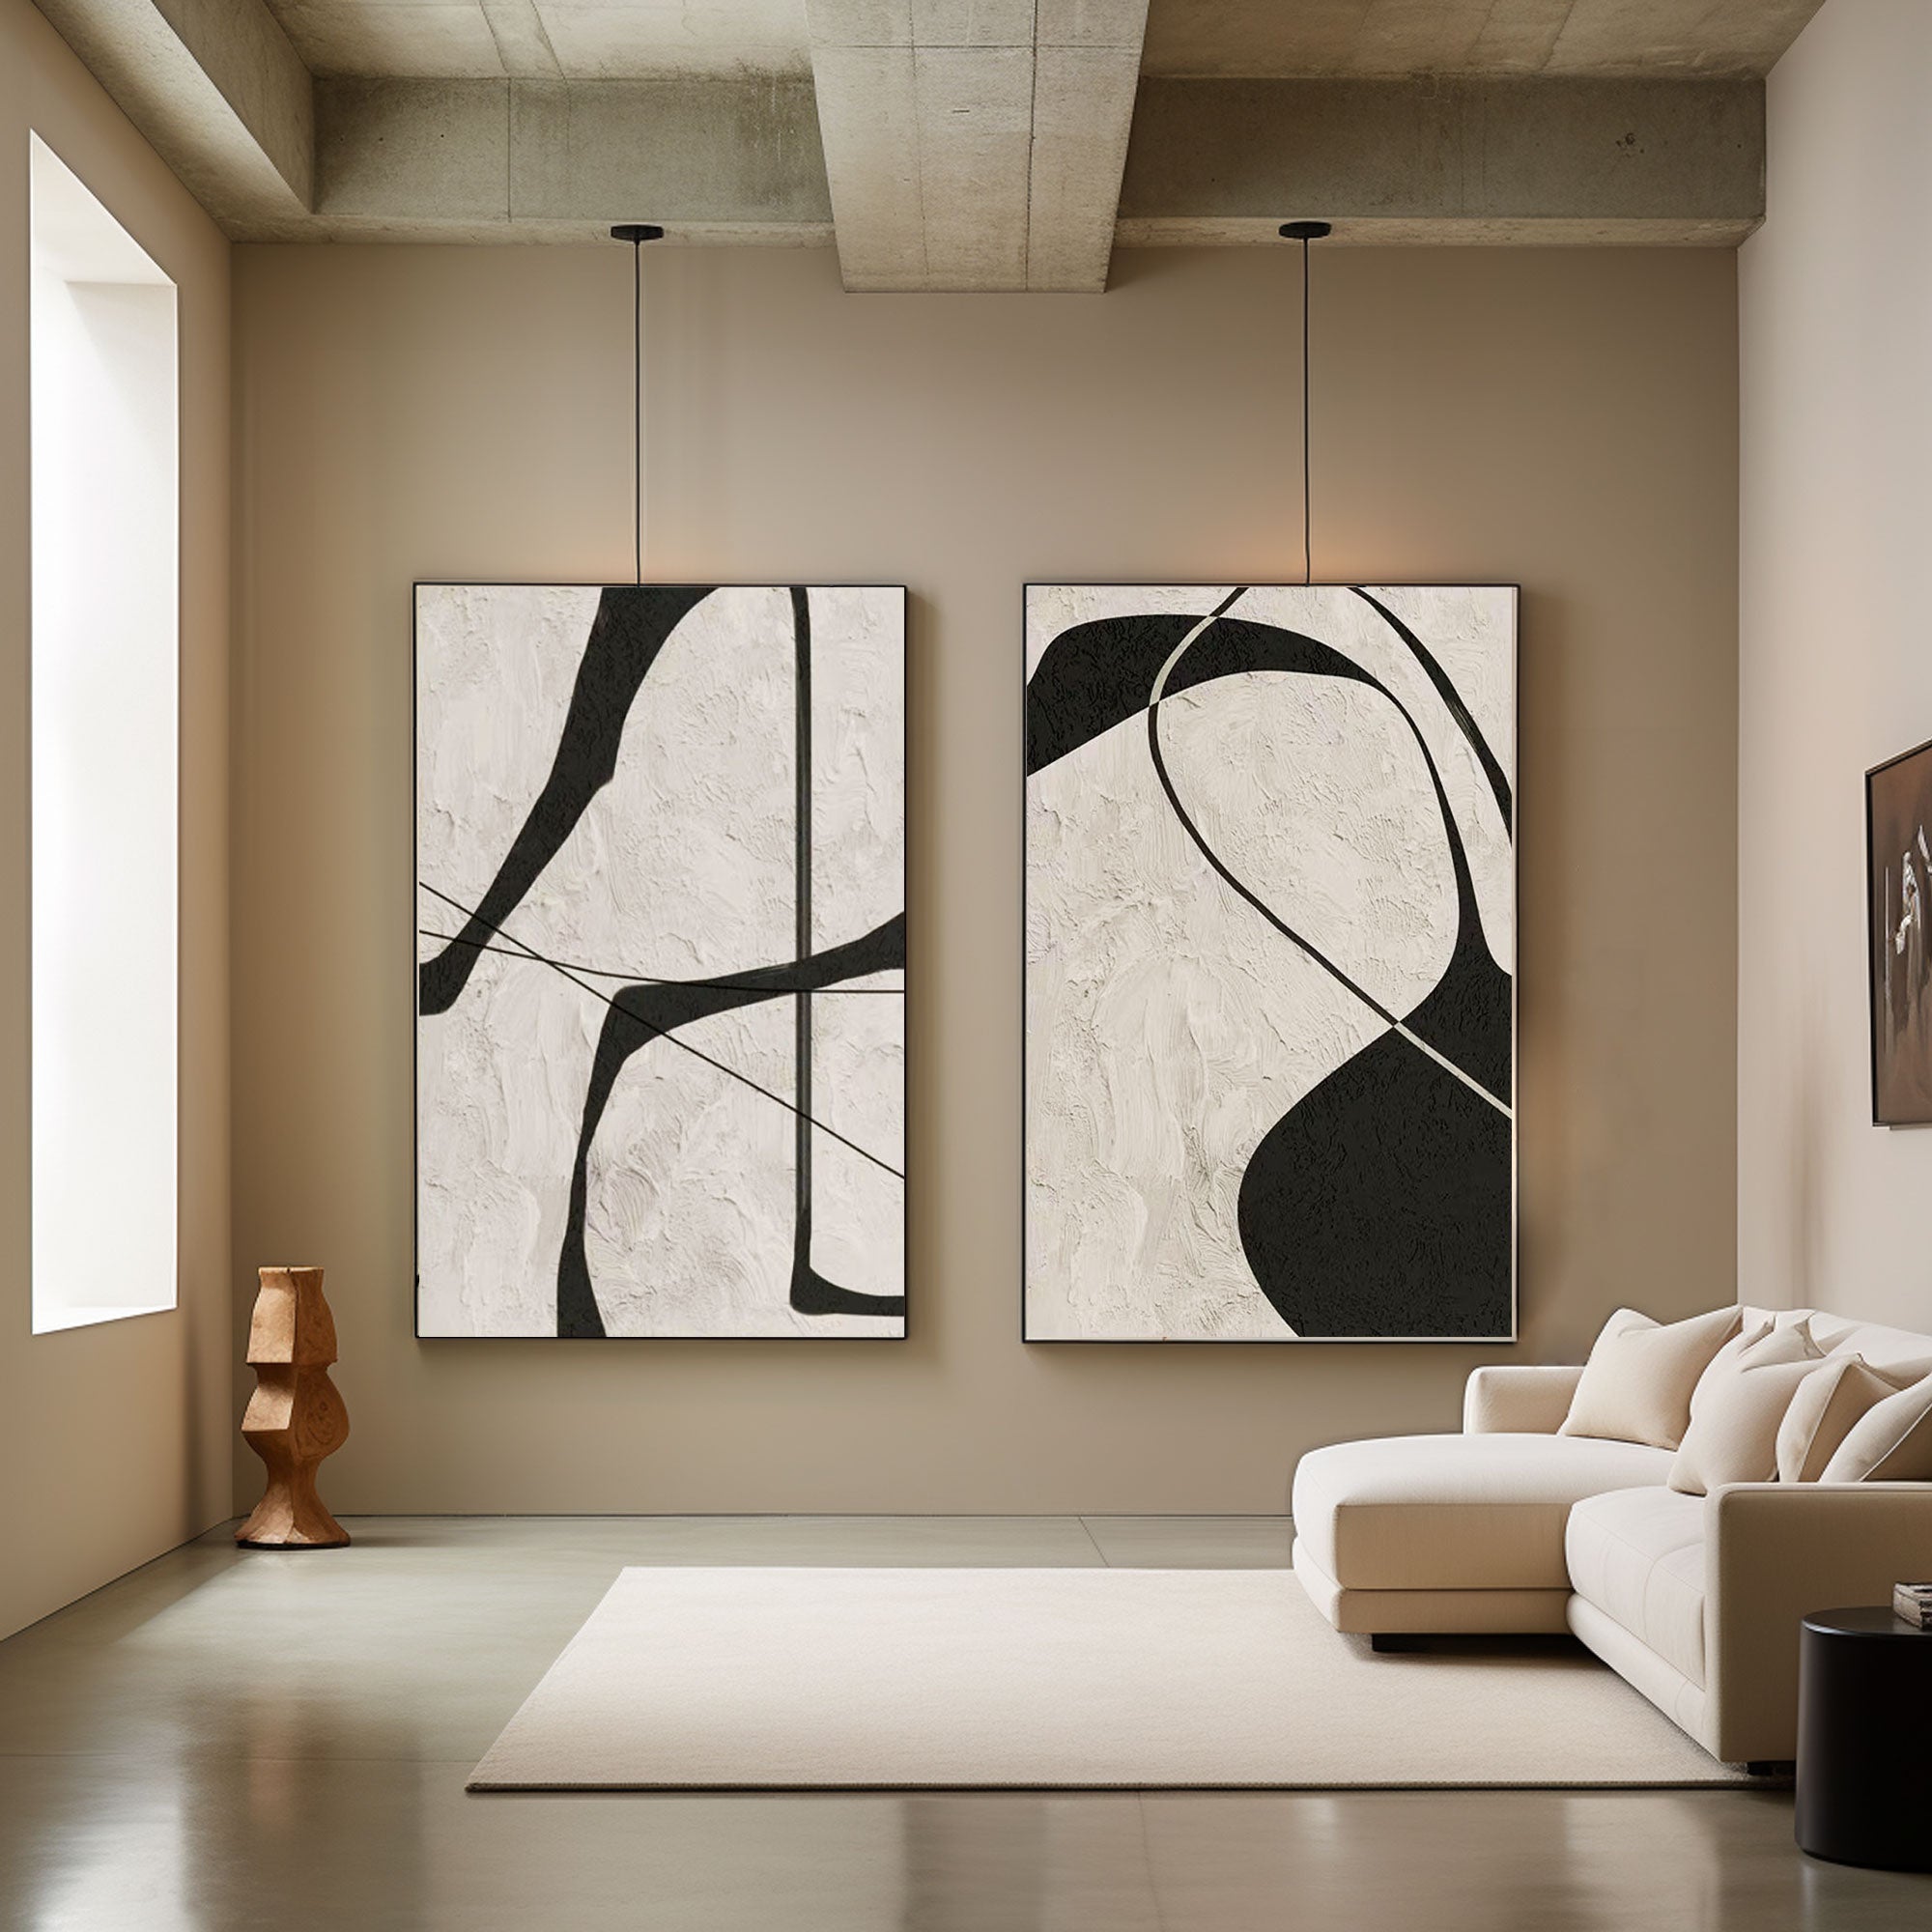 Black & White Minimalist Abstract Art Painting   "Whispers of Romance"